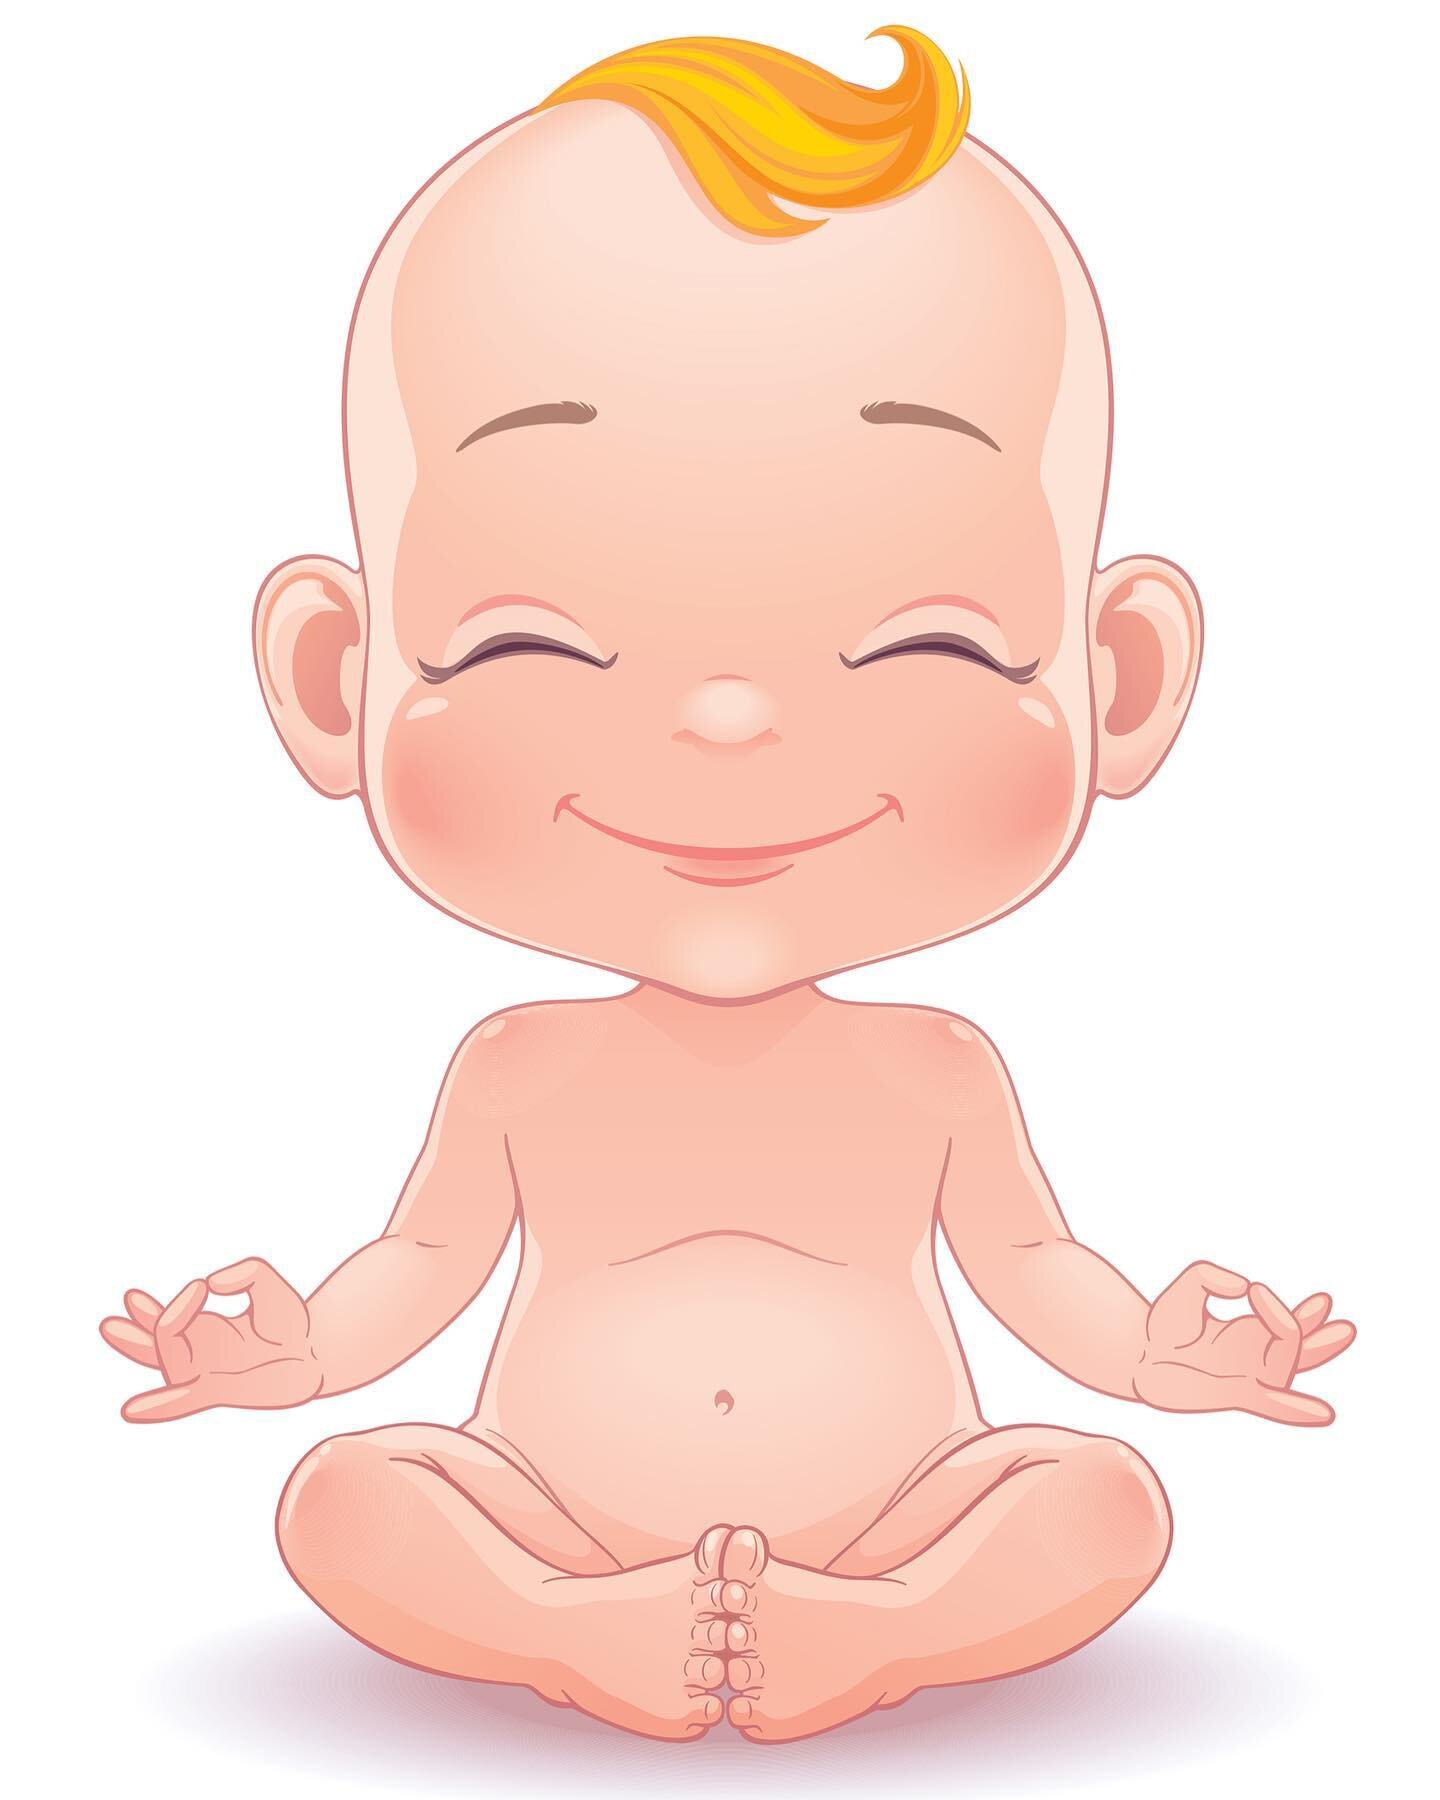 Ready for Mom &amp; Baby Yoga this afternoon at 3?
We&rsquo;ve only two spaces left, if you&rsquo;ve a baby under 1 year why not come join the giggling gurgling fun? Namaste Yogis 🌸 #momandbabyyoga #momandbabyclasses #fulham #putney #putneymoms #eve